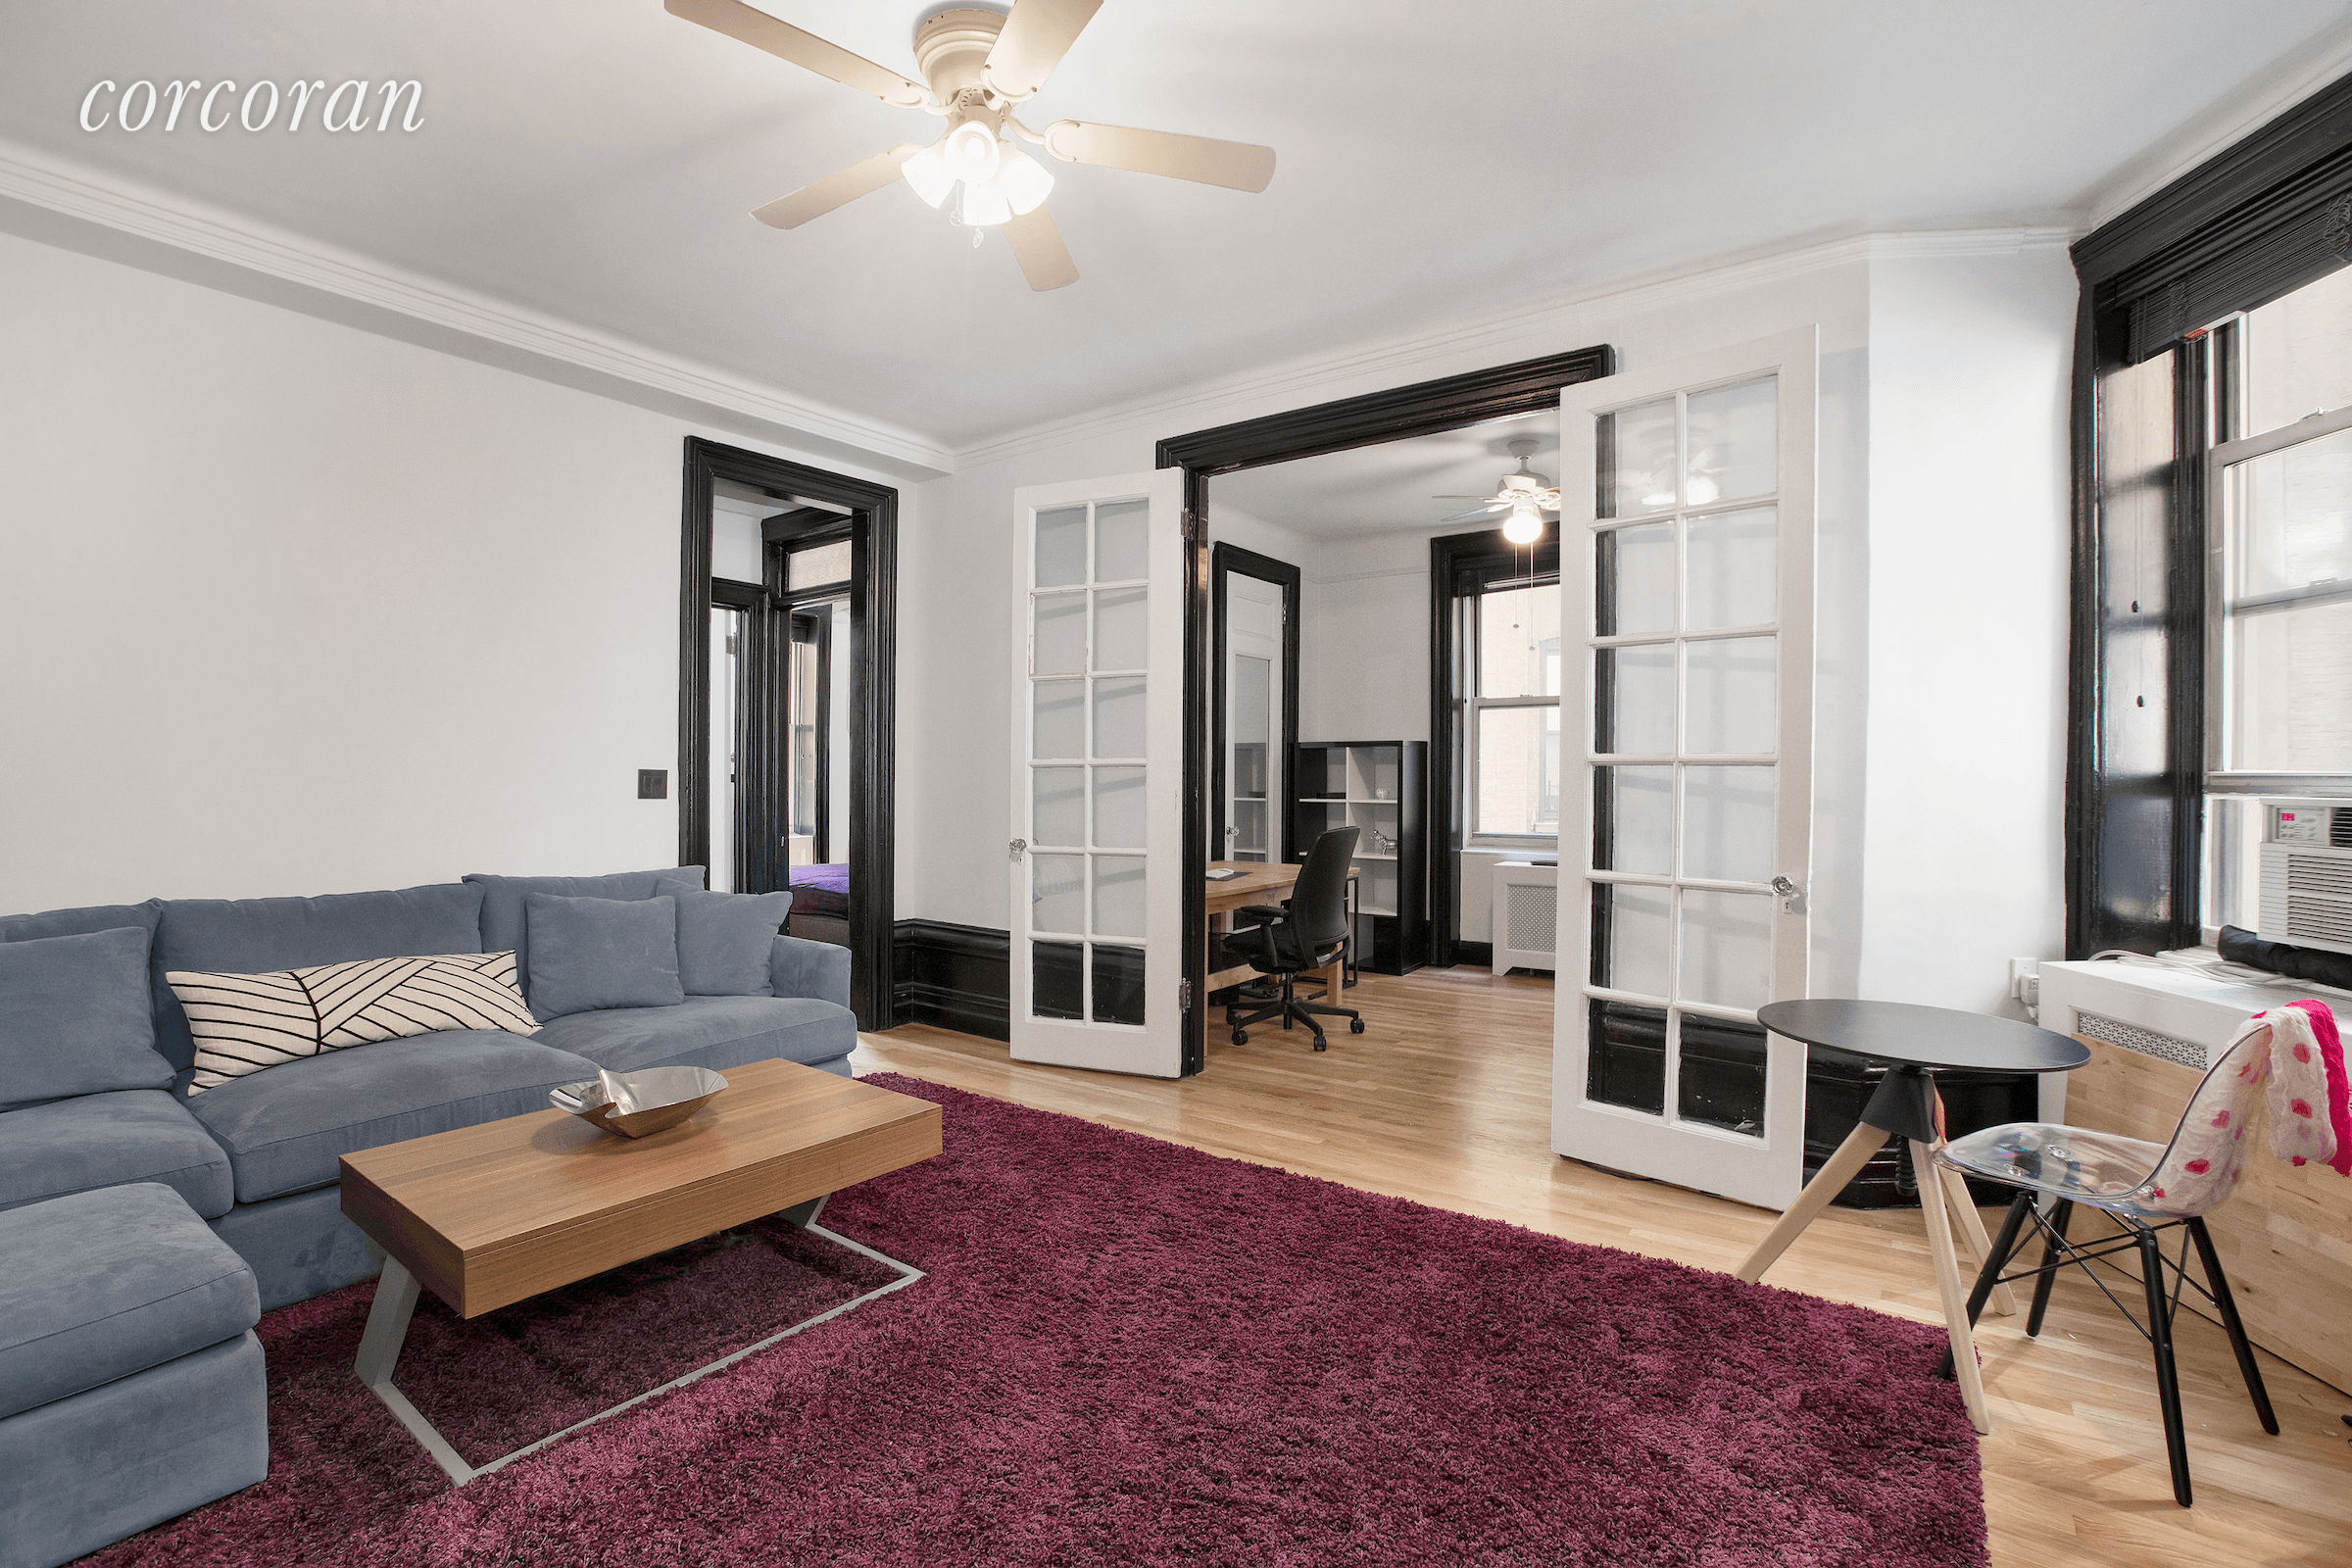 BETWEEN COLUMBIA UNIVERSITY AND RIVERSIDE PARKRight across from Columbia Universitys front gates, this renovated 2 bedroom with 1 bathroom is available for rent in one of the areas most sought ...